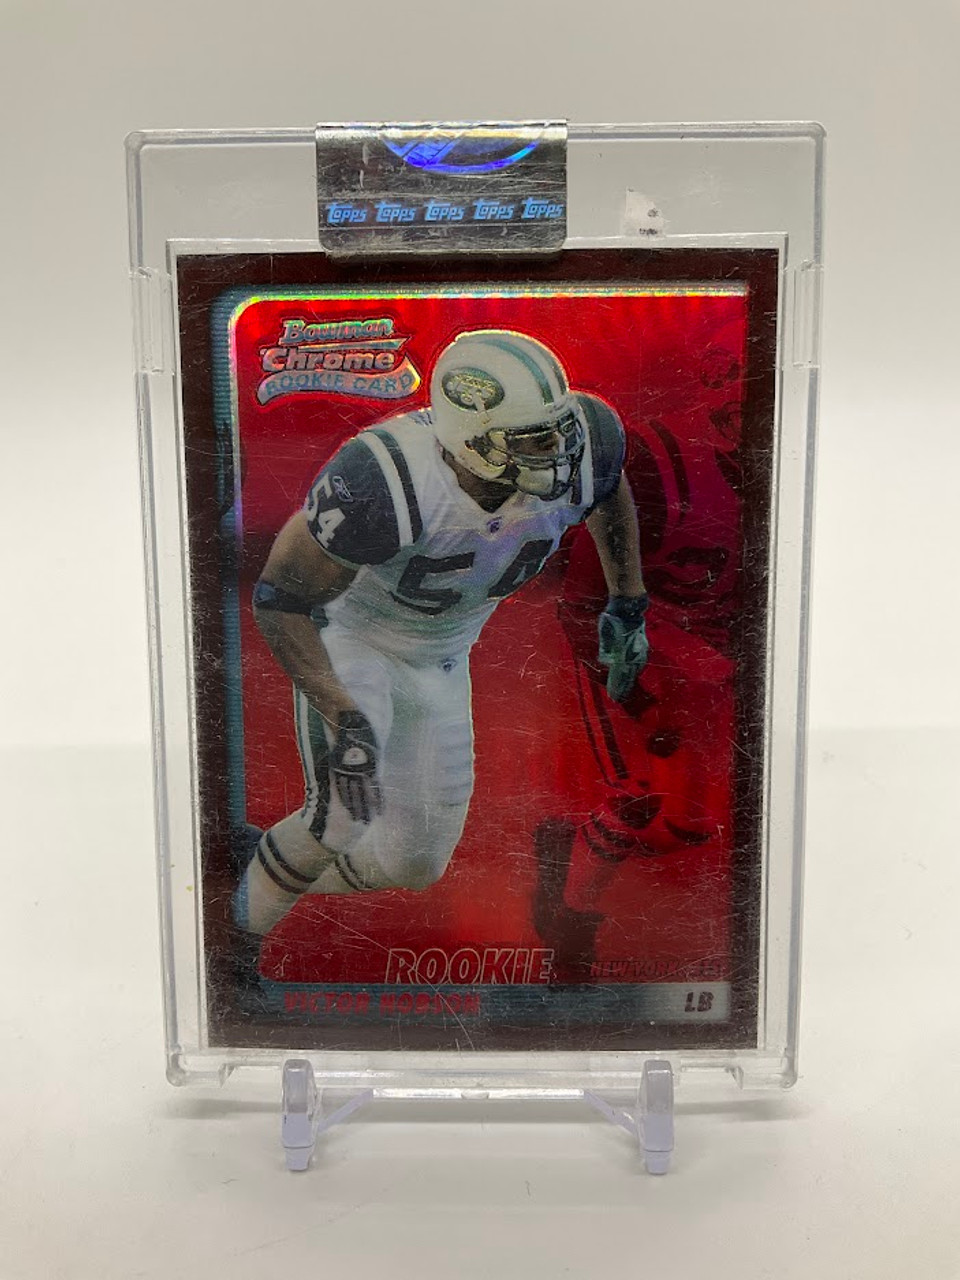 Victor Hobson 2003 Topps Bowman Chrome Red Refractor Rookie Card 089/235 #117 New York Jets